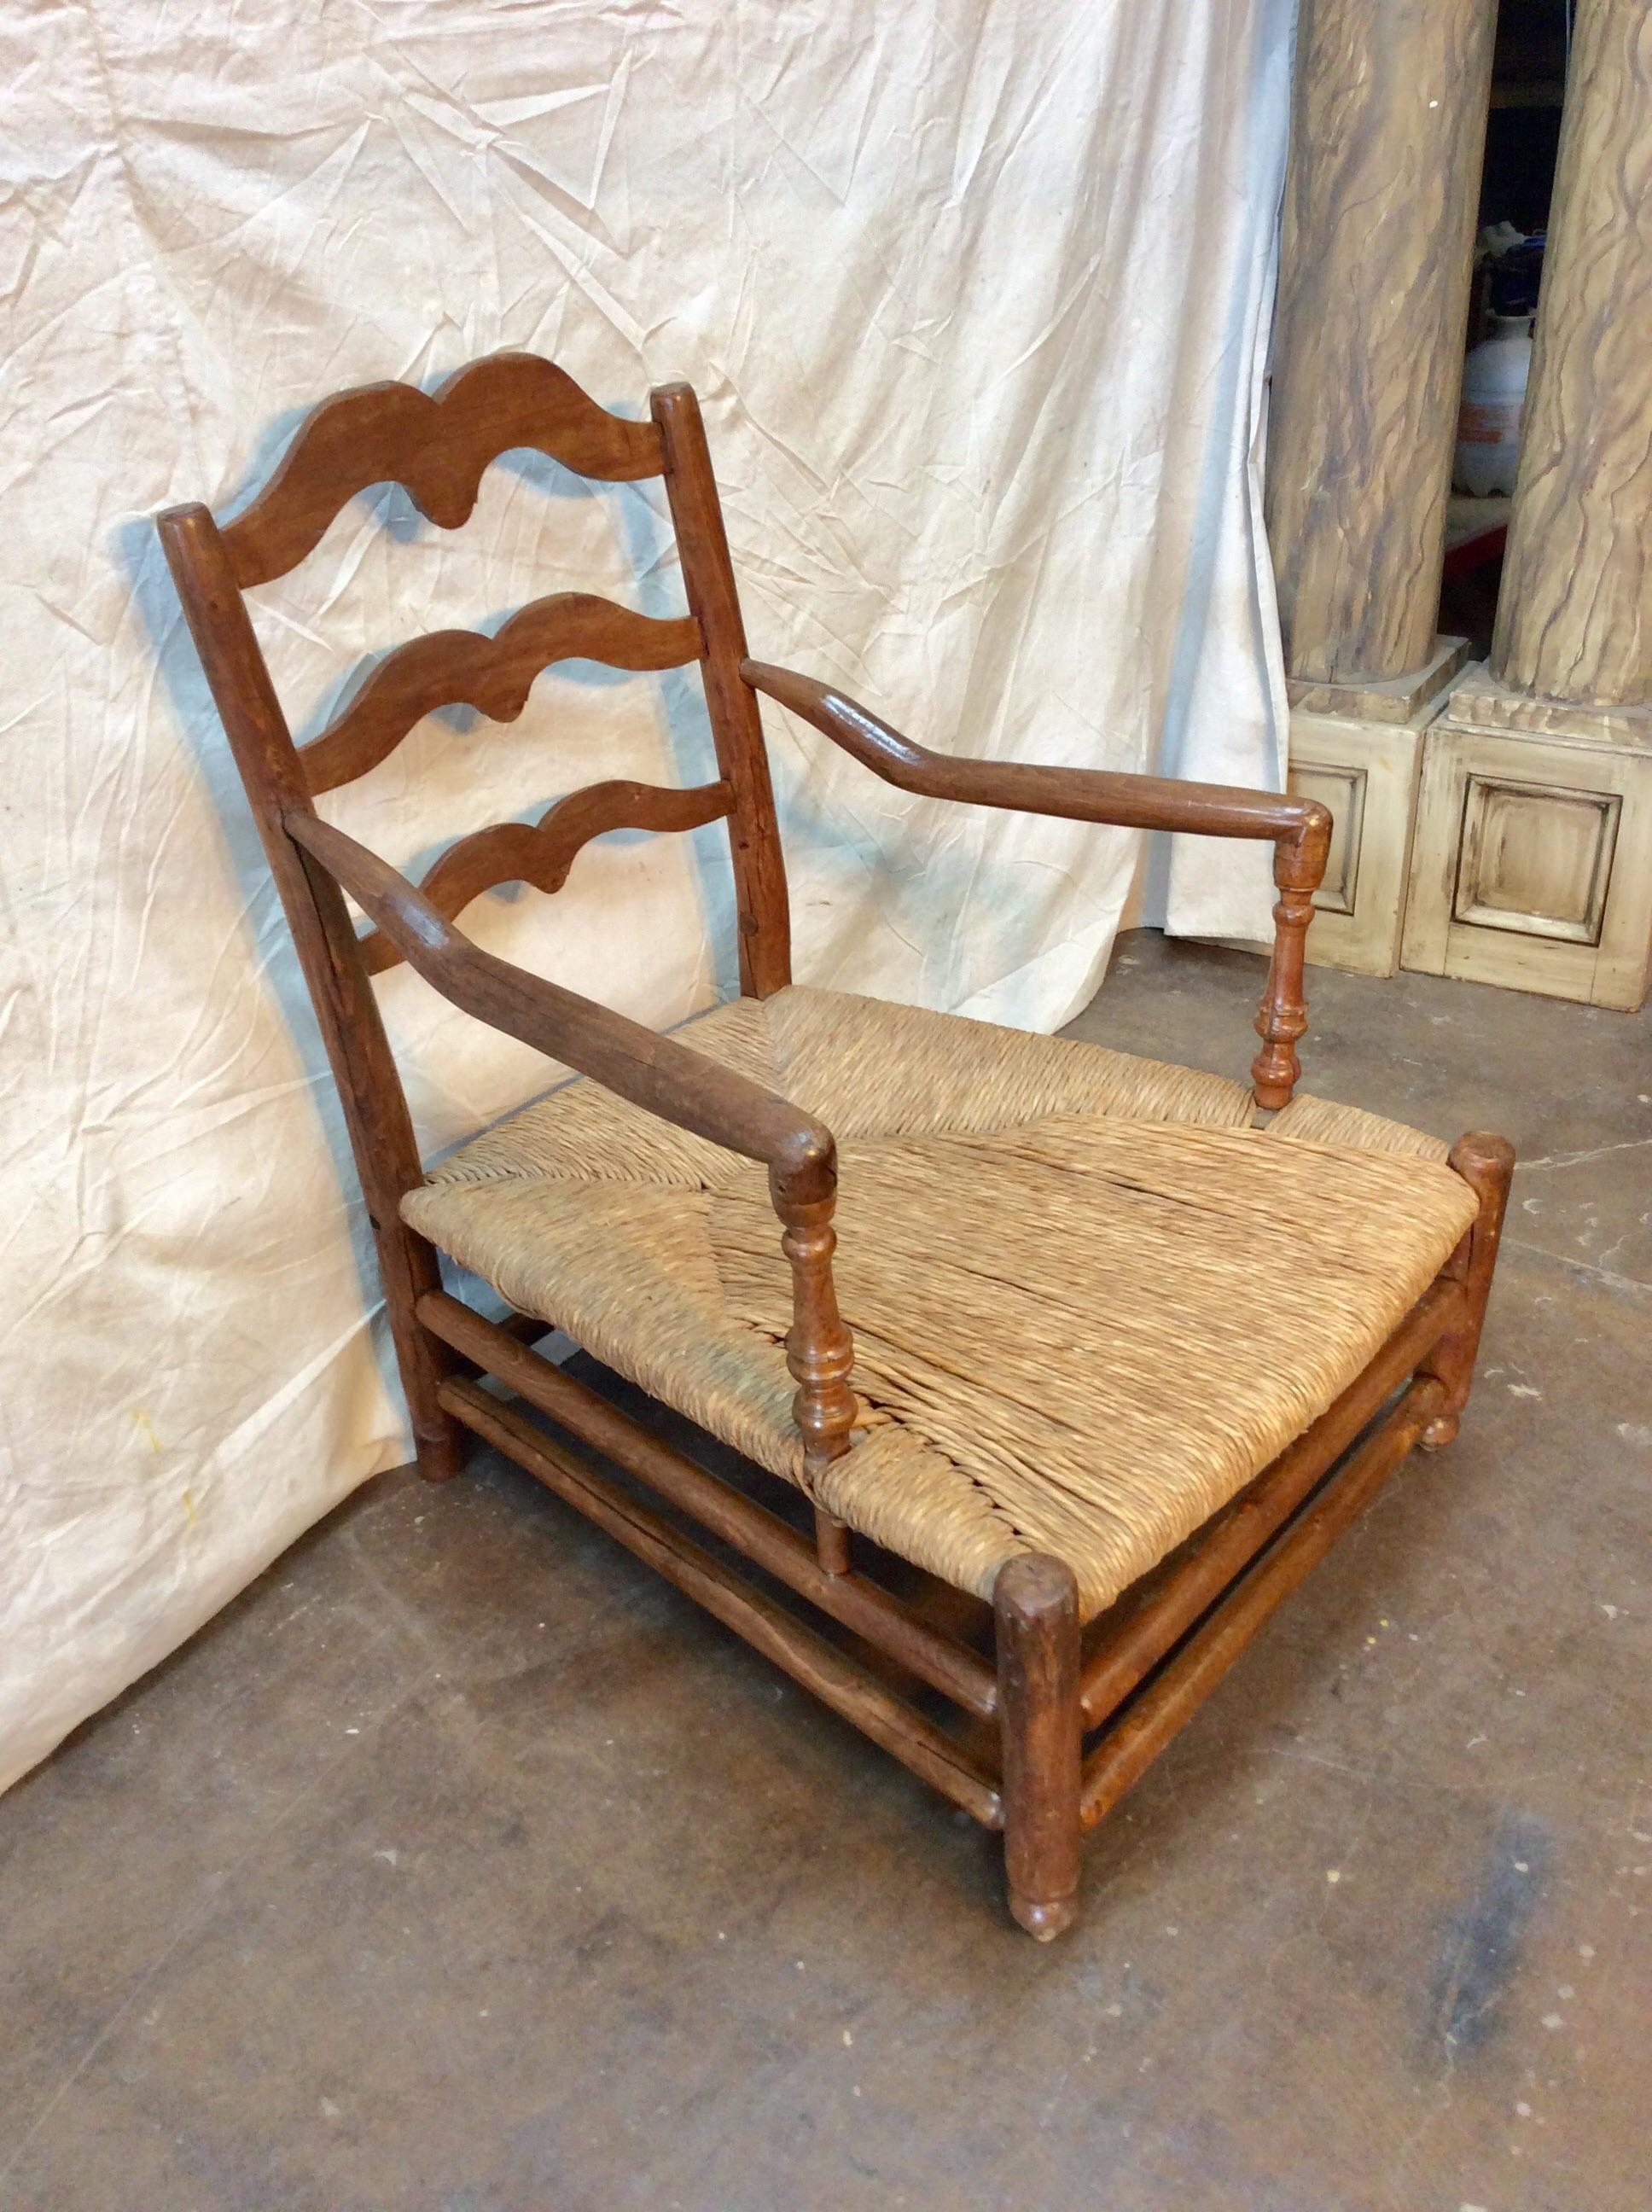 Found in the South of France this mid 1800s French Rush Seat Lounge Chair features a rush seat created by using a weaving technique where long, dried grass-like vegetation is used. The fauteuil armchair or lounge chair was constructed with a high